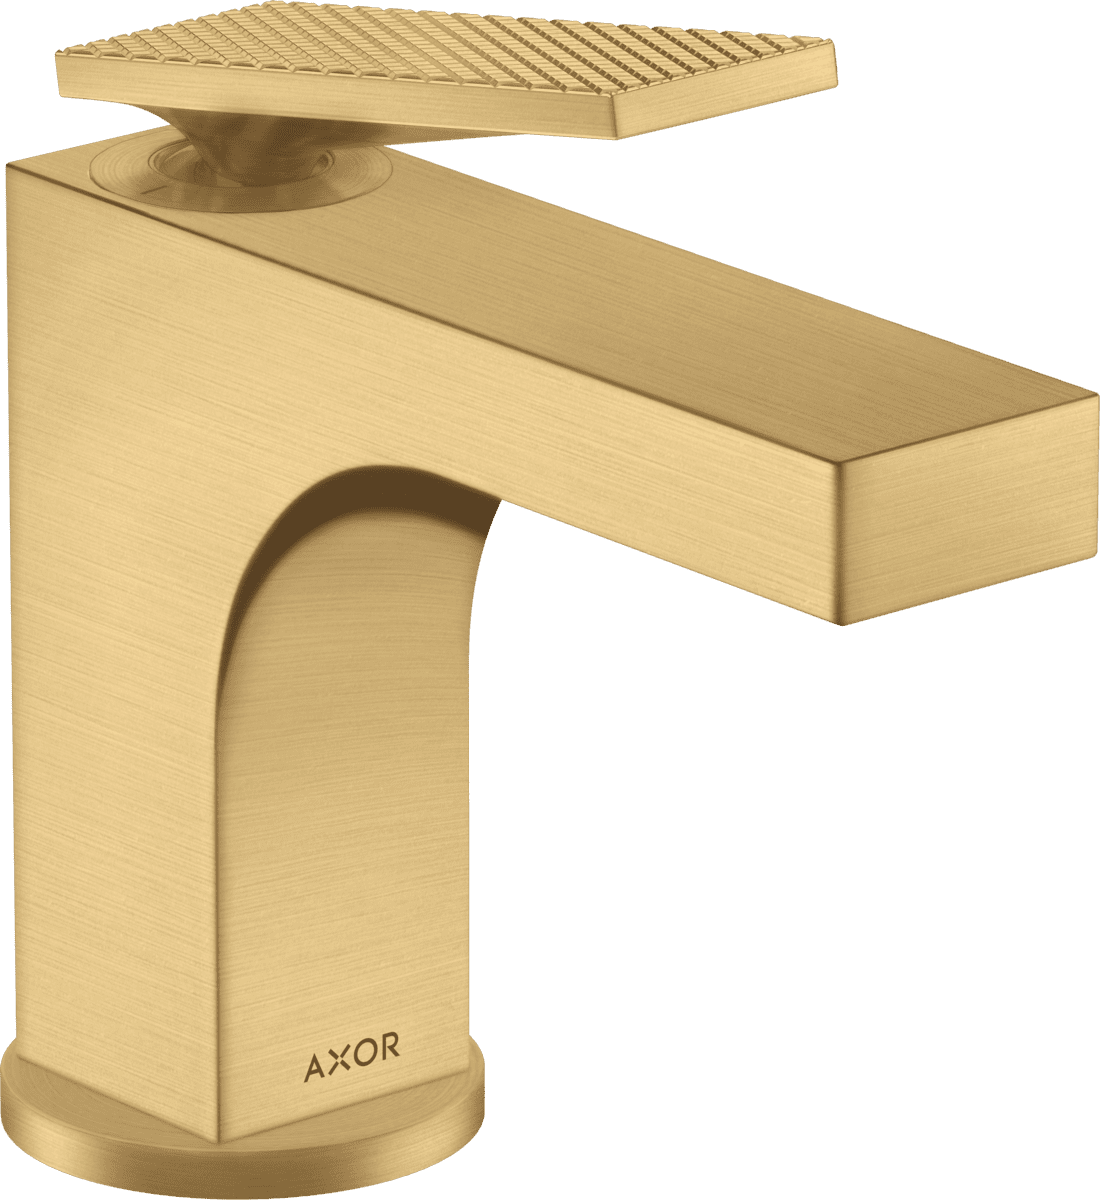 Picture of HANSGROHE AXOR Citterio Single lever basin mixer 90 with lever handle for hand wash basins with pop-up waste set - rhombic cut #39001250 - Brushed Gold Optic